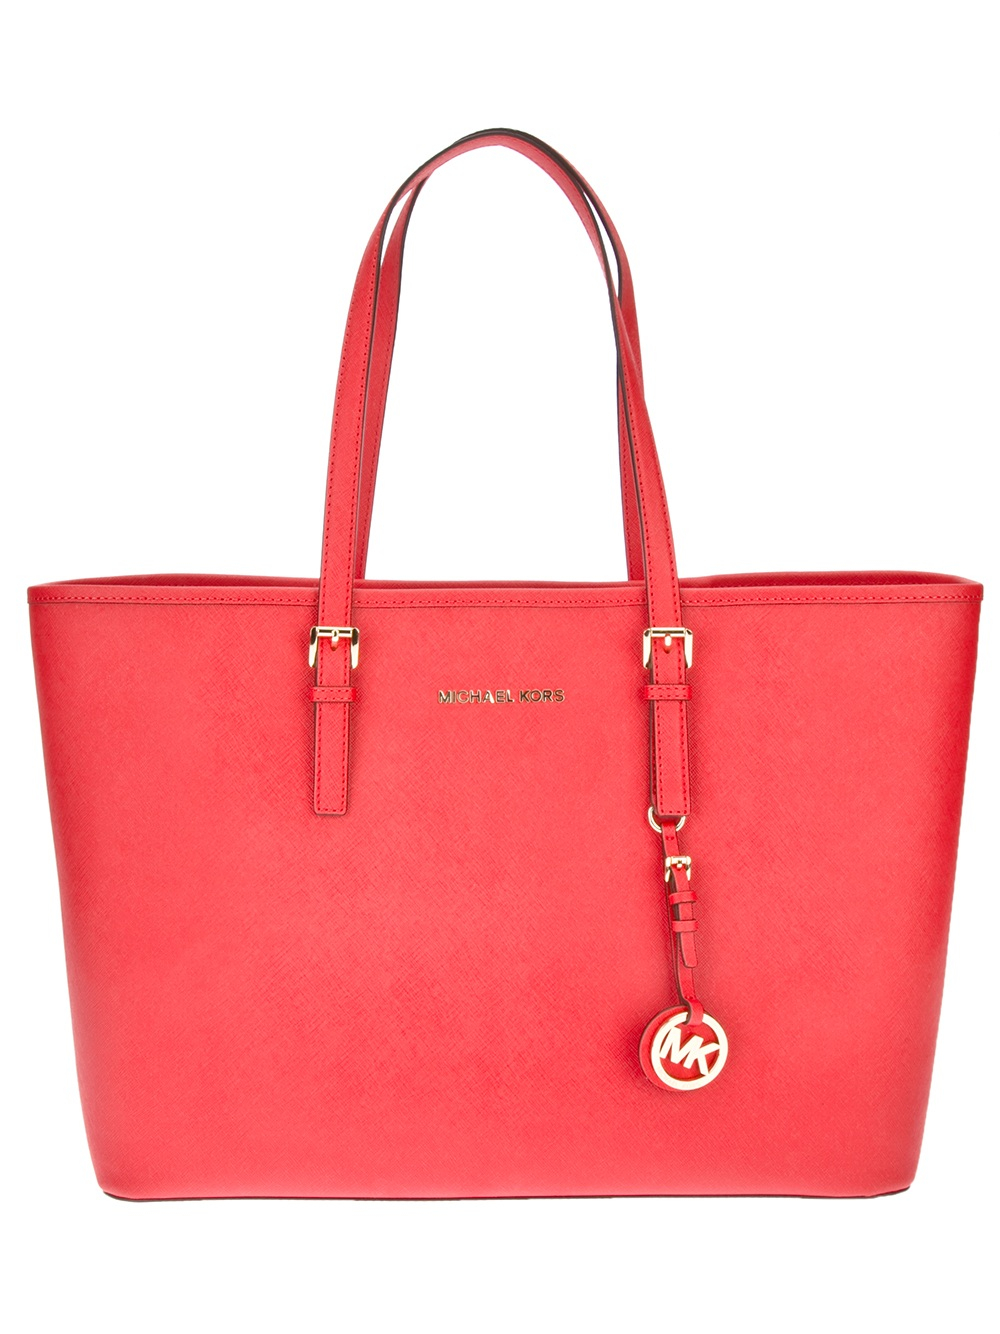 Michael kors Leather Tote in Red | Lyst